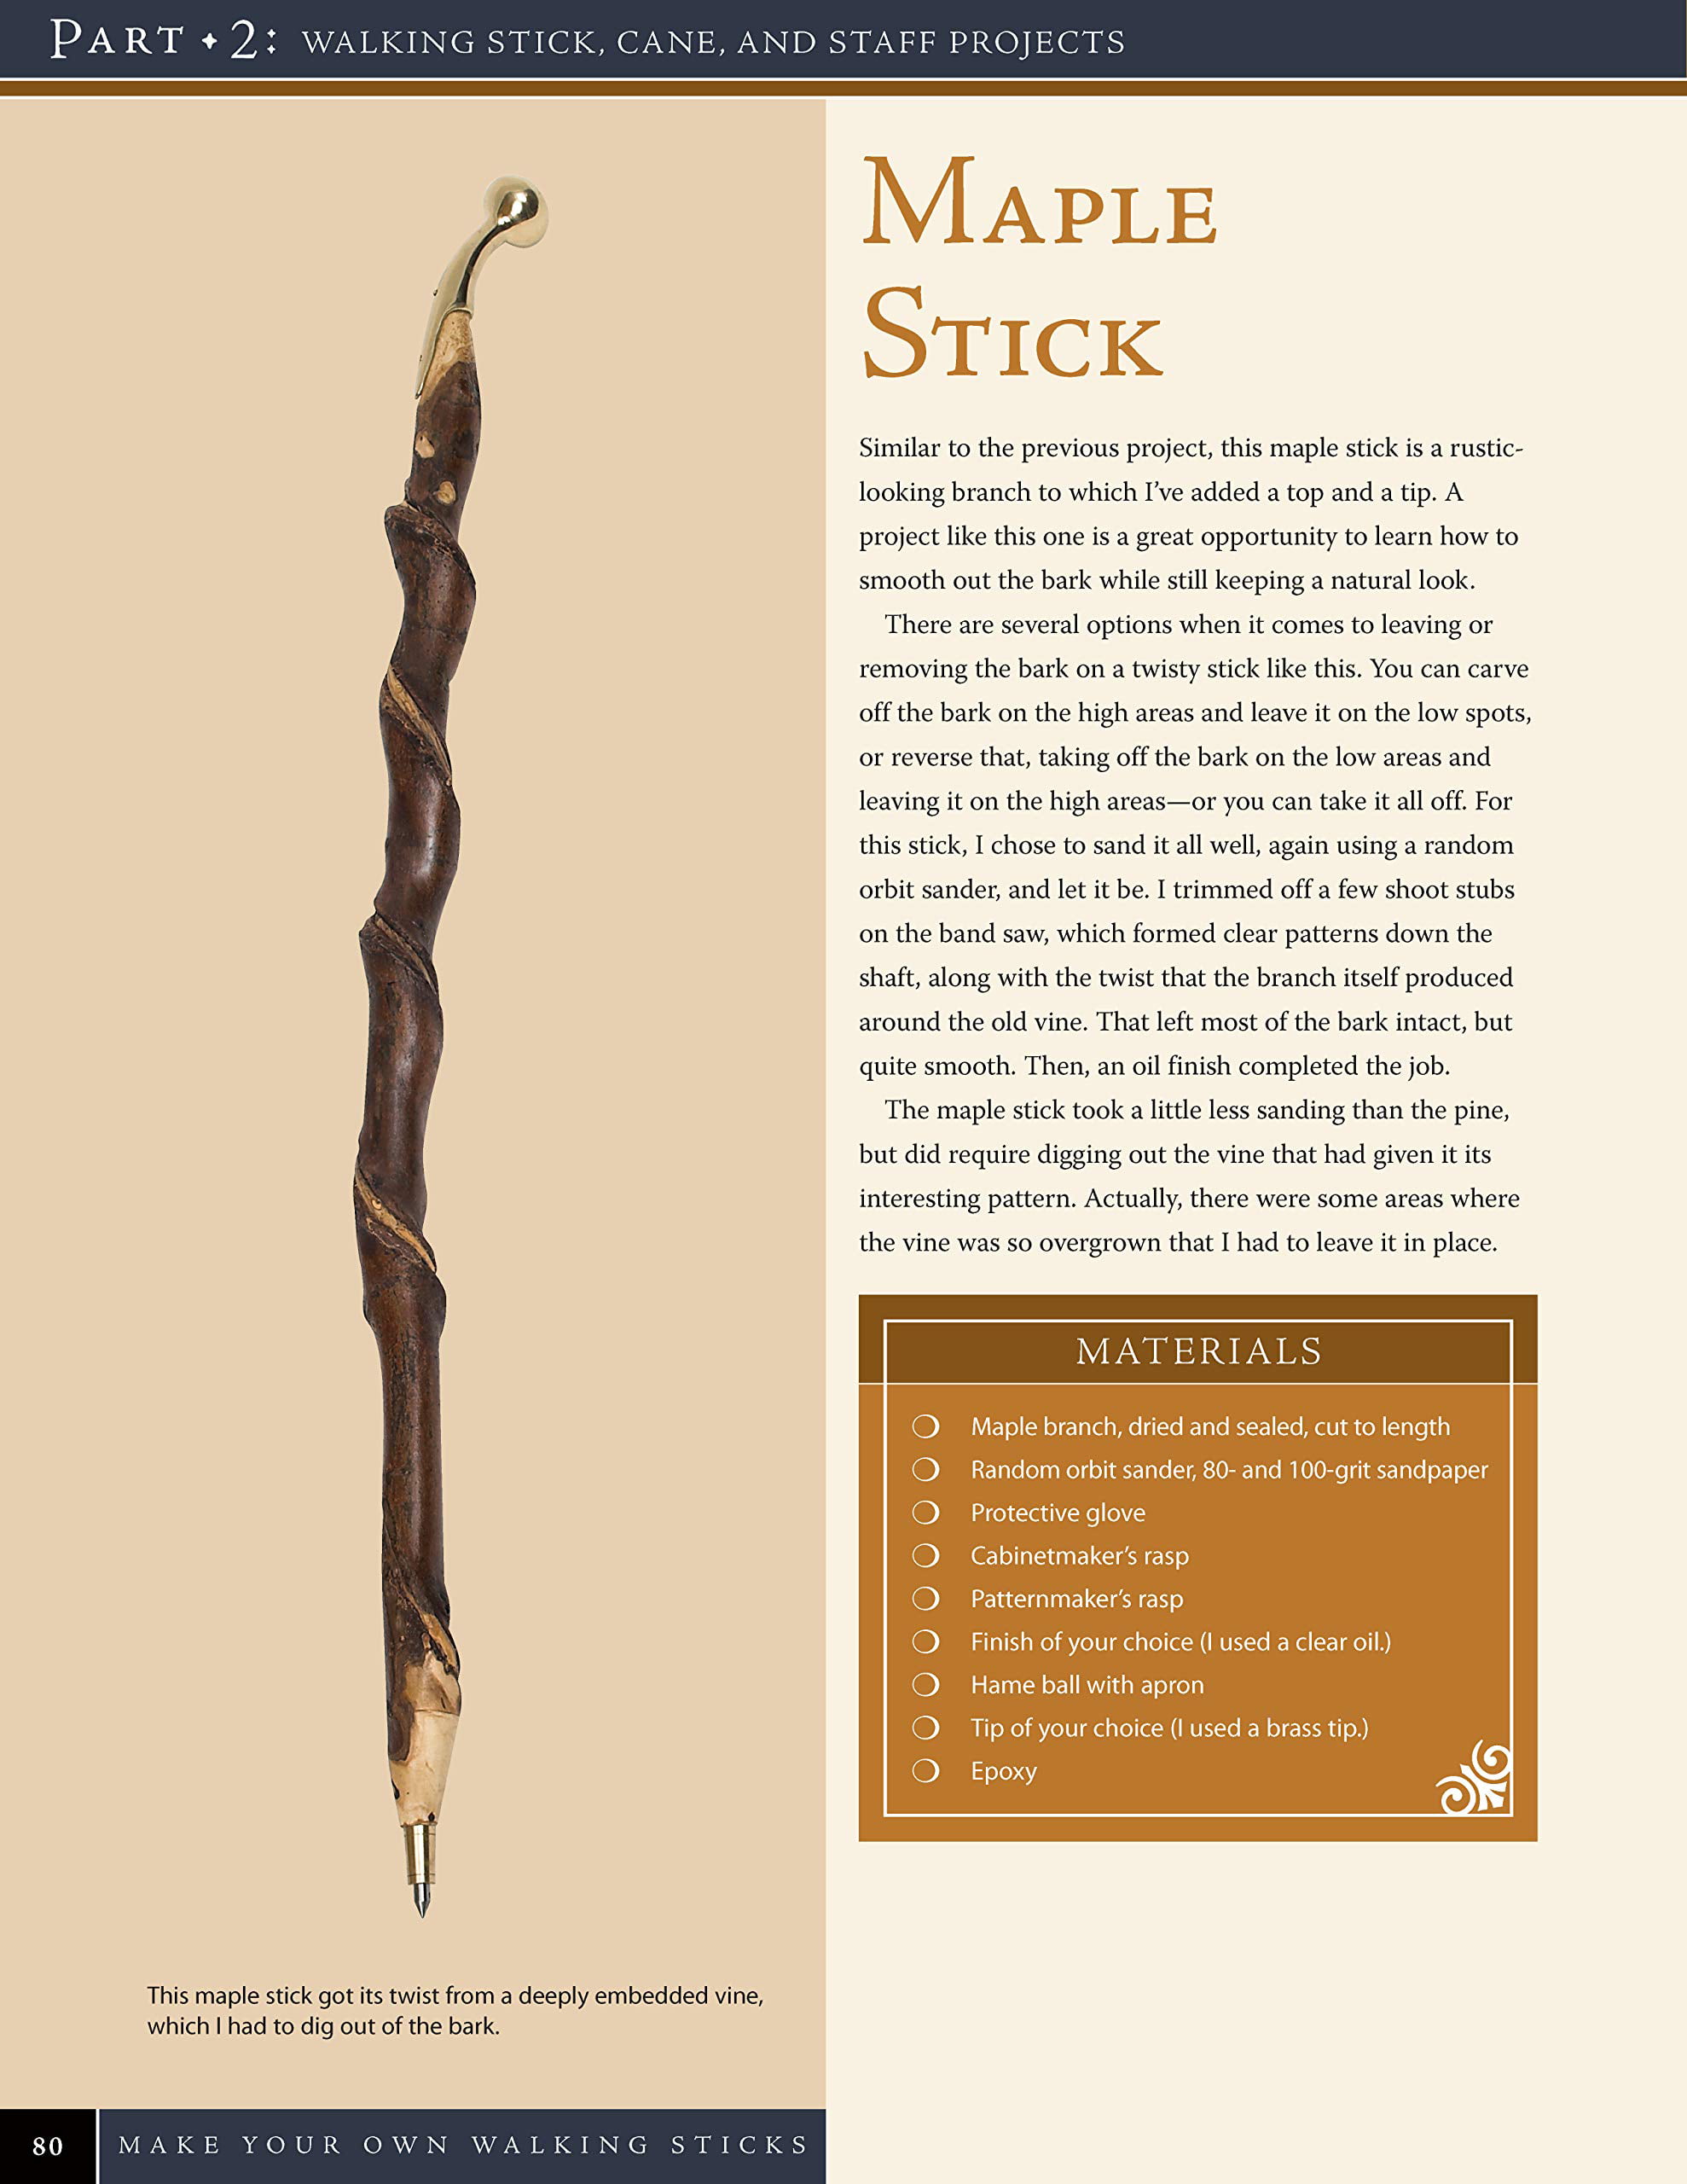 Make Your Own Walking Sticks : How to Craft Canes and Staffs from Rustic to  Fancy 